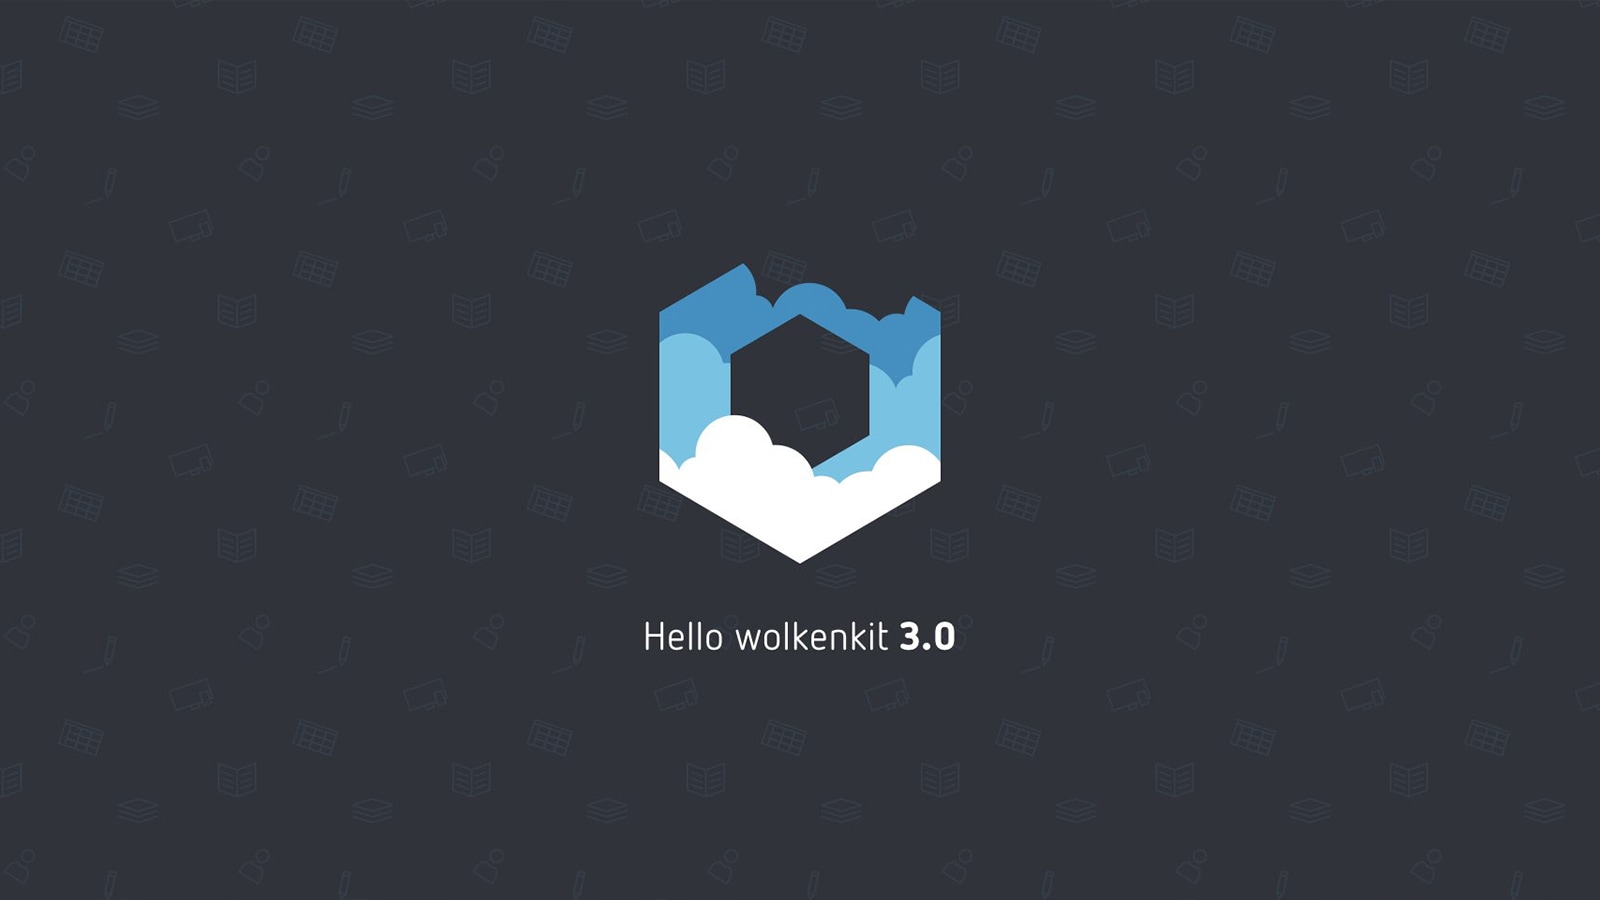 We’re delighted to introduce you to: wolkenkit 3.0